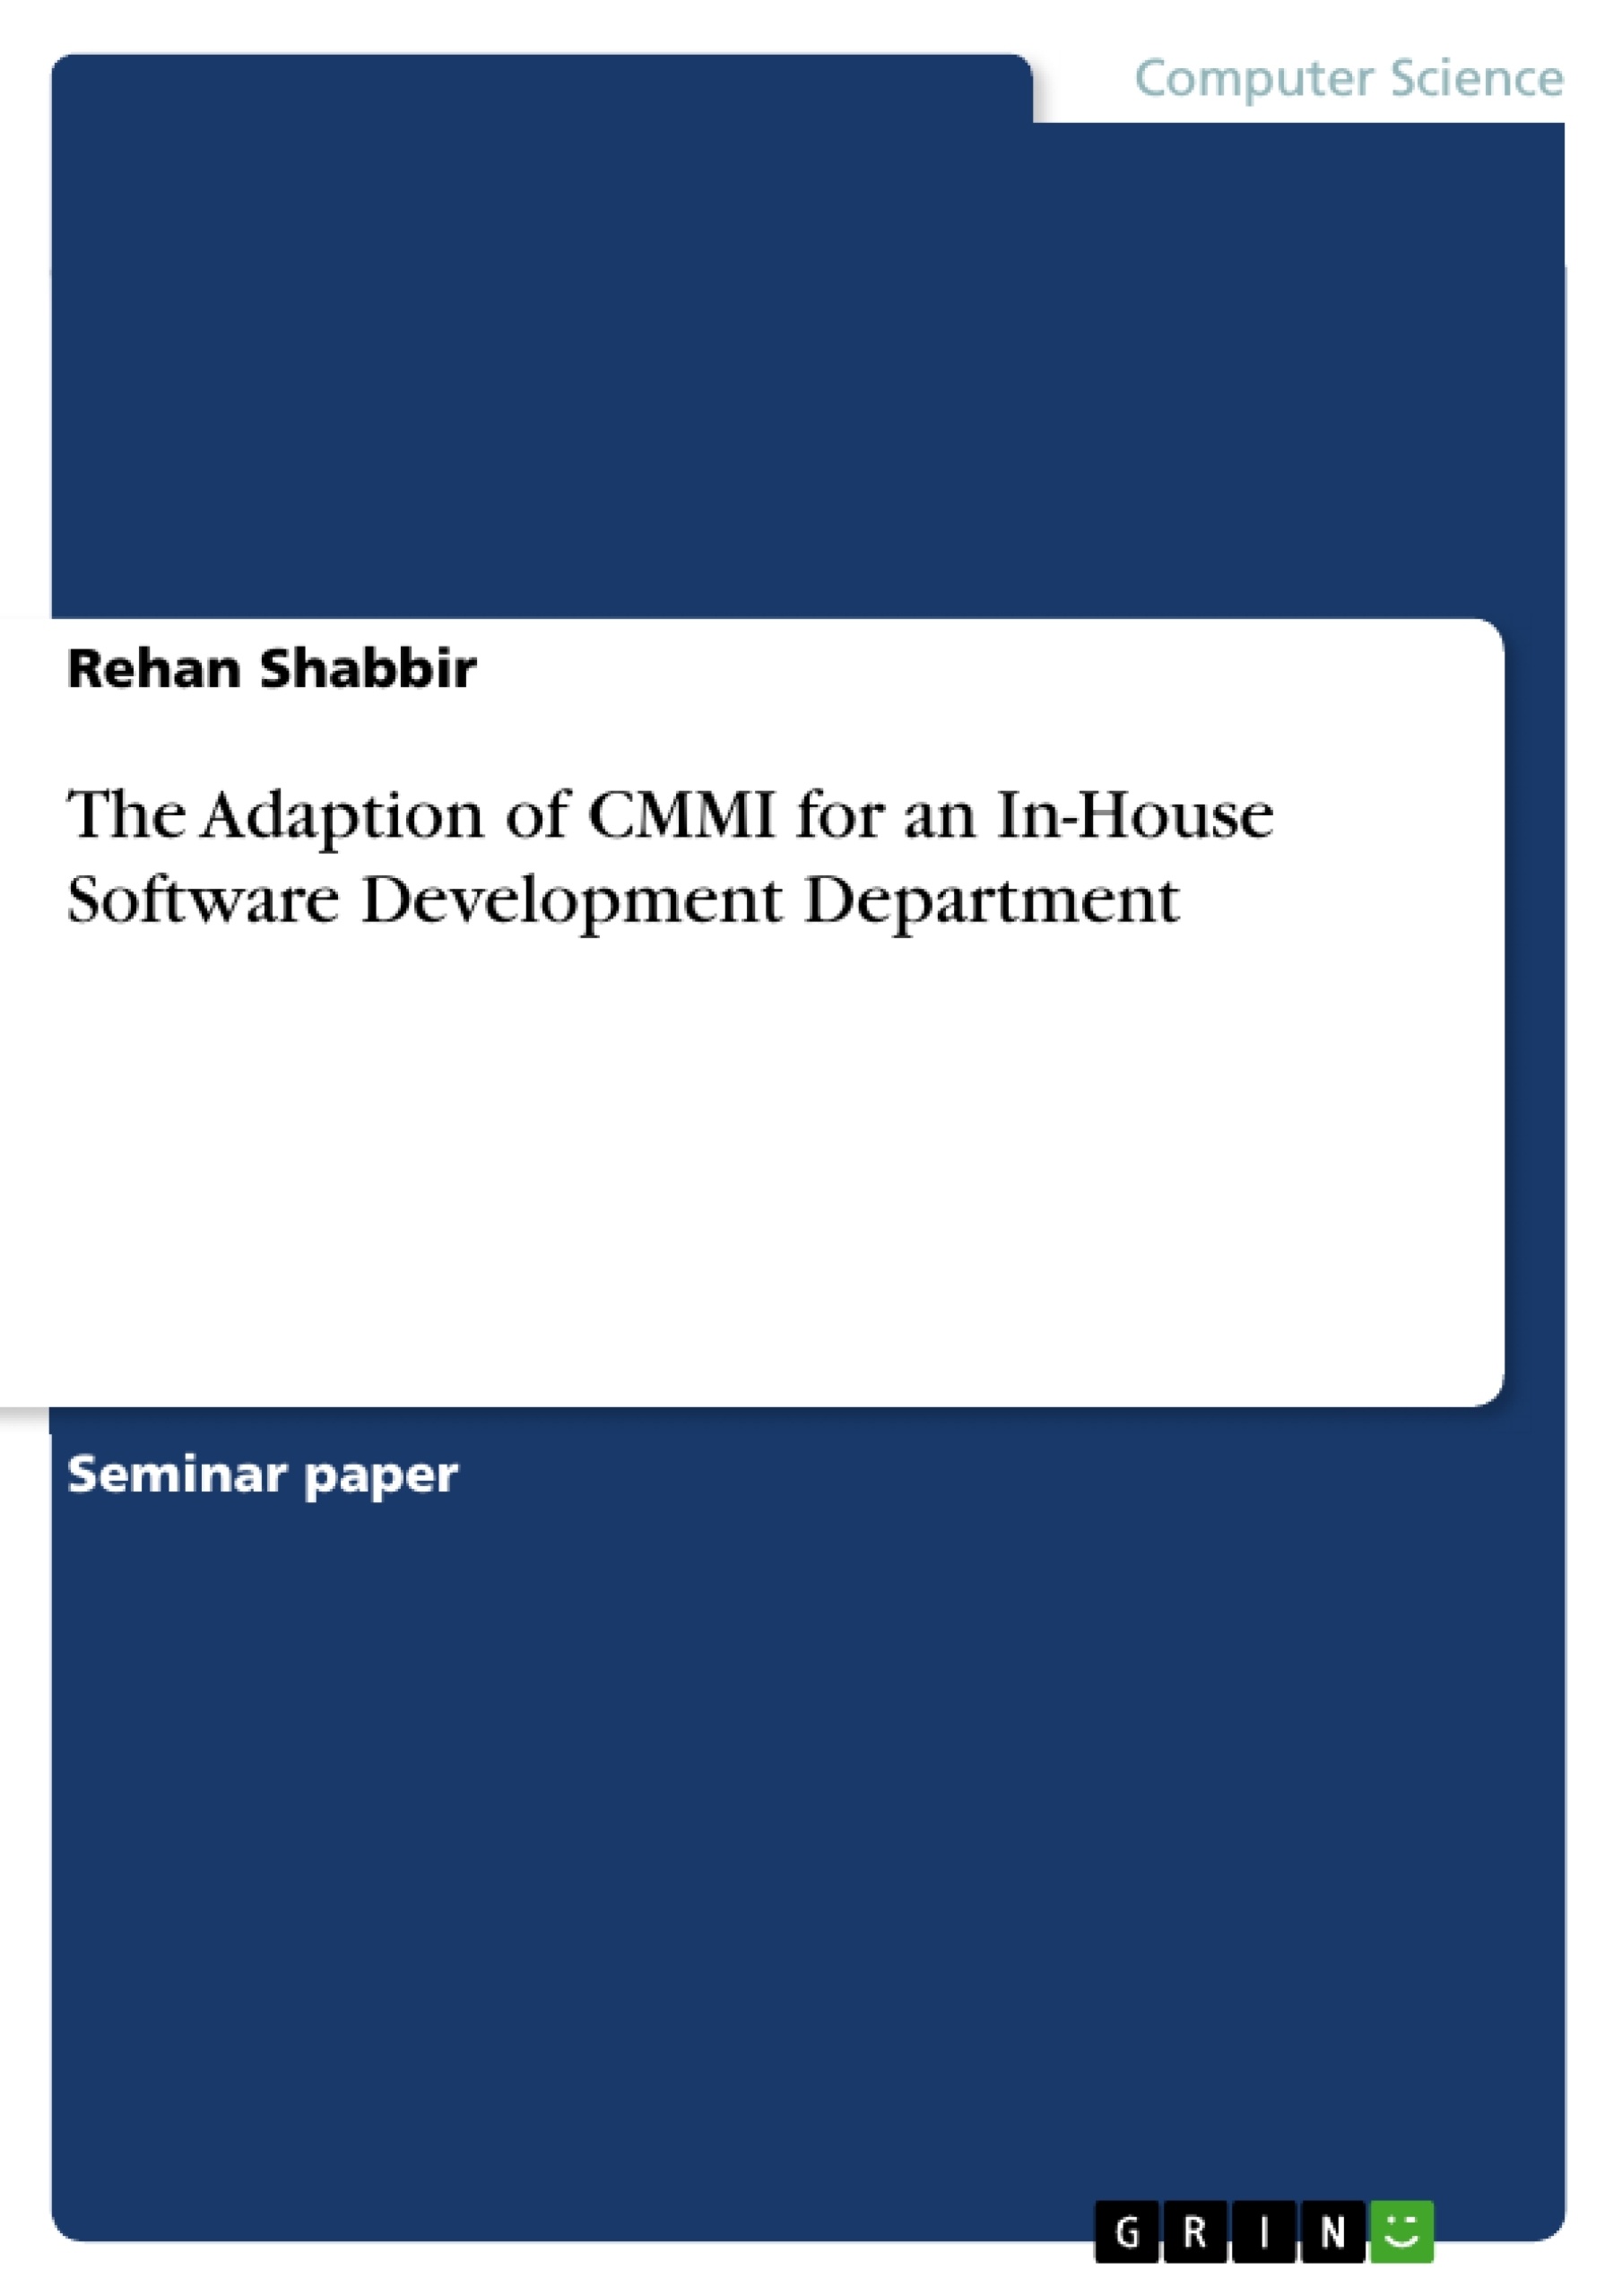 Titre: The Adaption of CMMI for an In-House Software Development Department